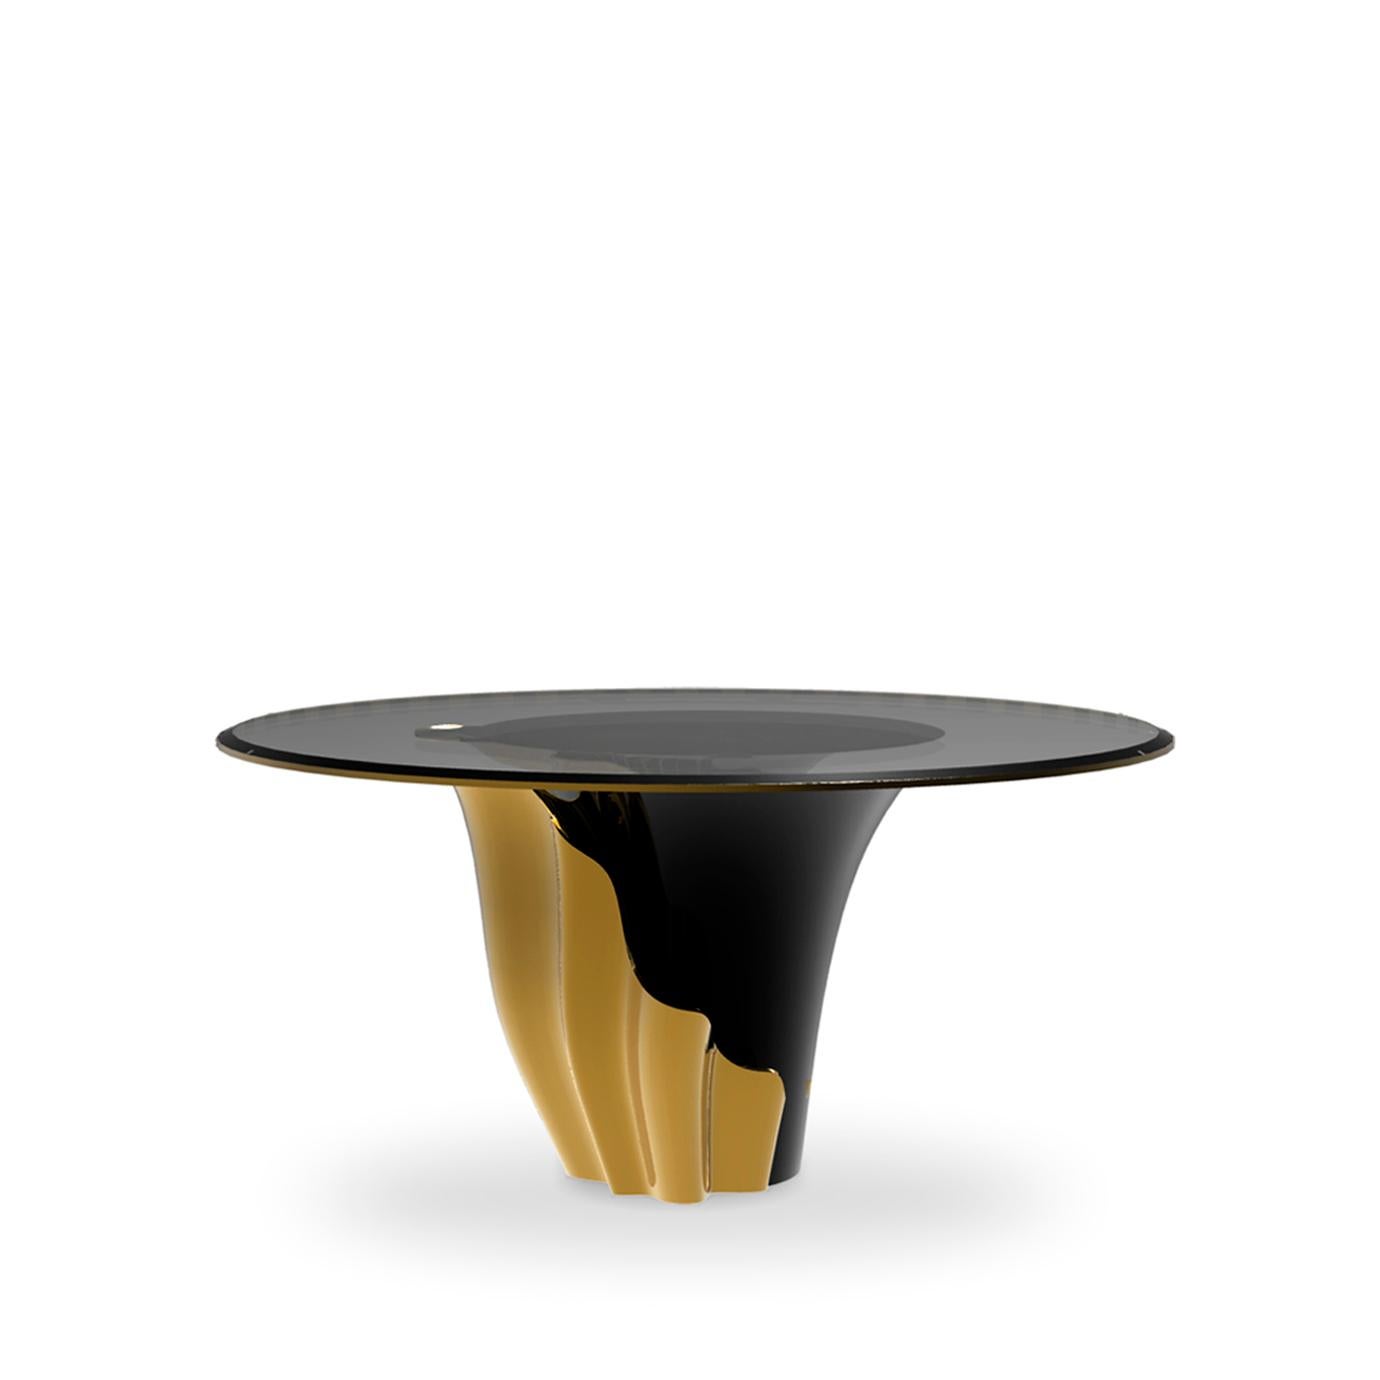 A central piece to any space, the contemporary design of the Yasmine dining table will have everyone doing double takes. The sultry silhouette is fashioned from tailored glass and mounted on a solid wooden base. Classic lacquer and luxurious plated